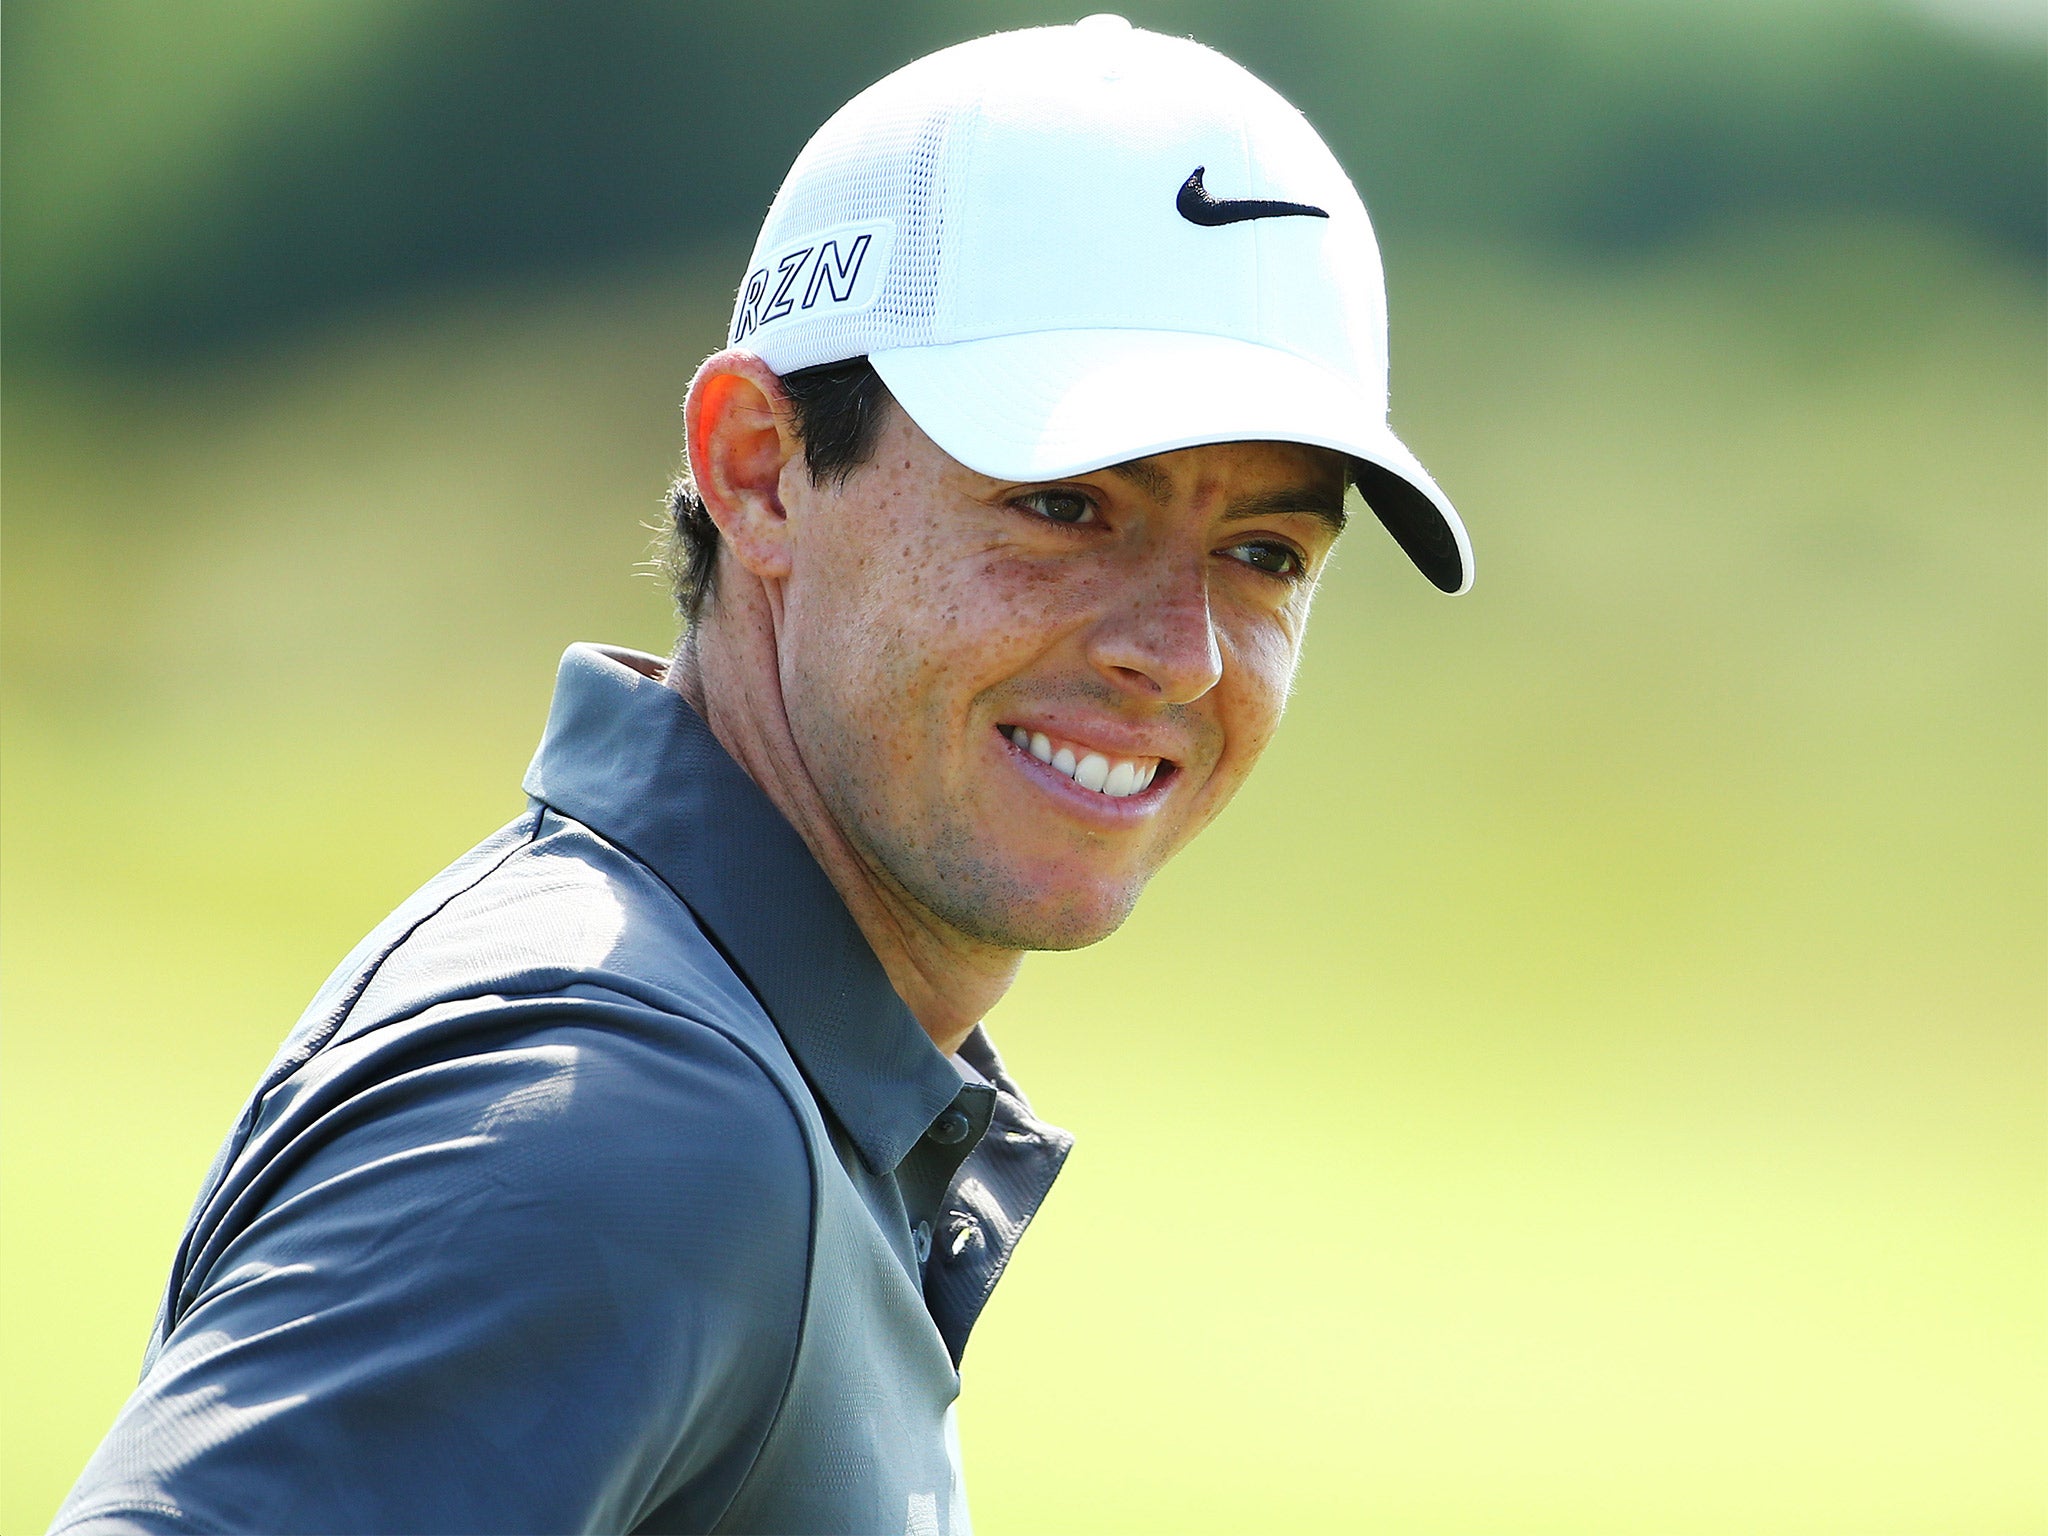 Mcilroy: 'I thought I was going to miss it [golf] more than I did'